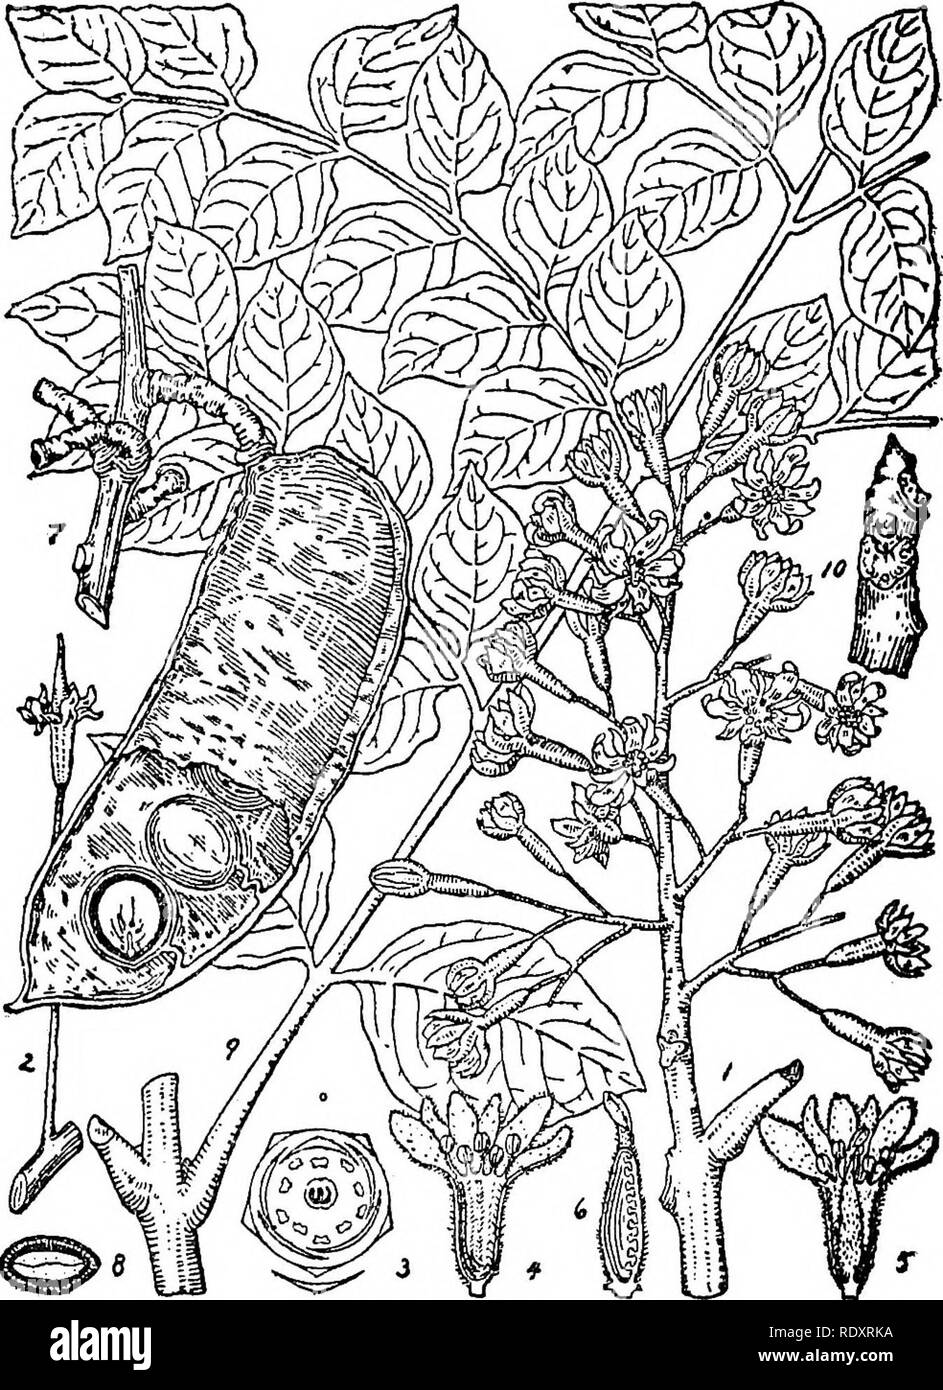 . A manual of poisonous plants, chiefly of eastern North America, with brief notes on economic and medicinal plants, and numerous illustrations. Poisonous plants. 538 MANUAL OF POISONOUS PLANTS. Fig. 295. Kentucky Coffee Tree (Gymnocladus dioica). Inflor- escence from staminate tree. 2. Pistillate flower. 3. Diagram of flower. 4. I^ongitudinal section of staminate flower. 5. Pistillate flower with a portion removed. 6. Pistil with a section of ovary removed. 7. Portion of branch bearing a single fruit, showing seed and embryo. 8. Cross section of seed. 9. Portion of leaf. 10. Portion of winter Stock Photo